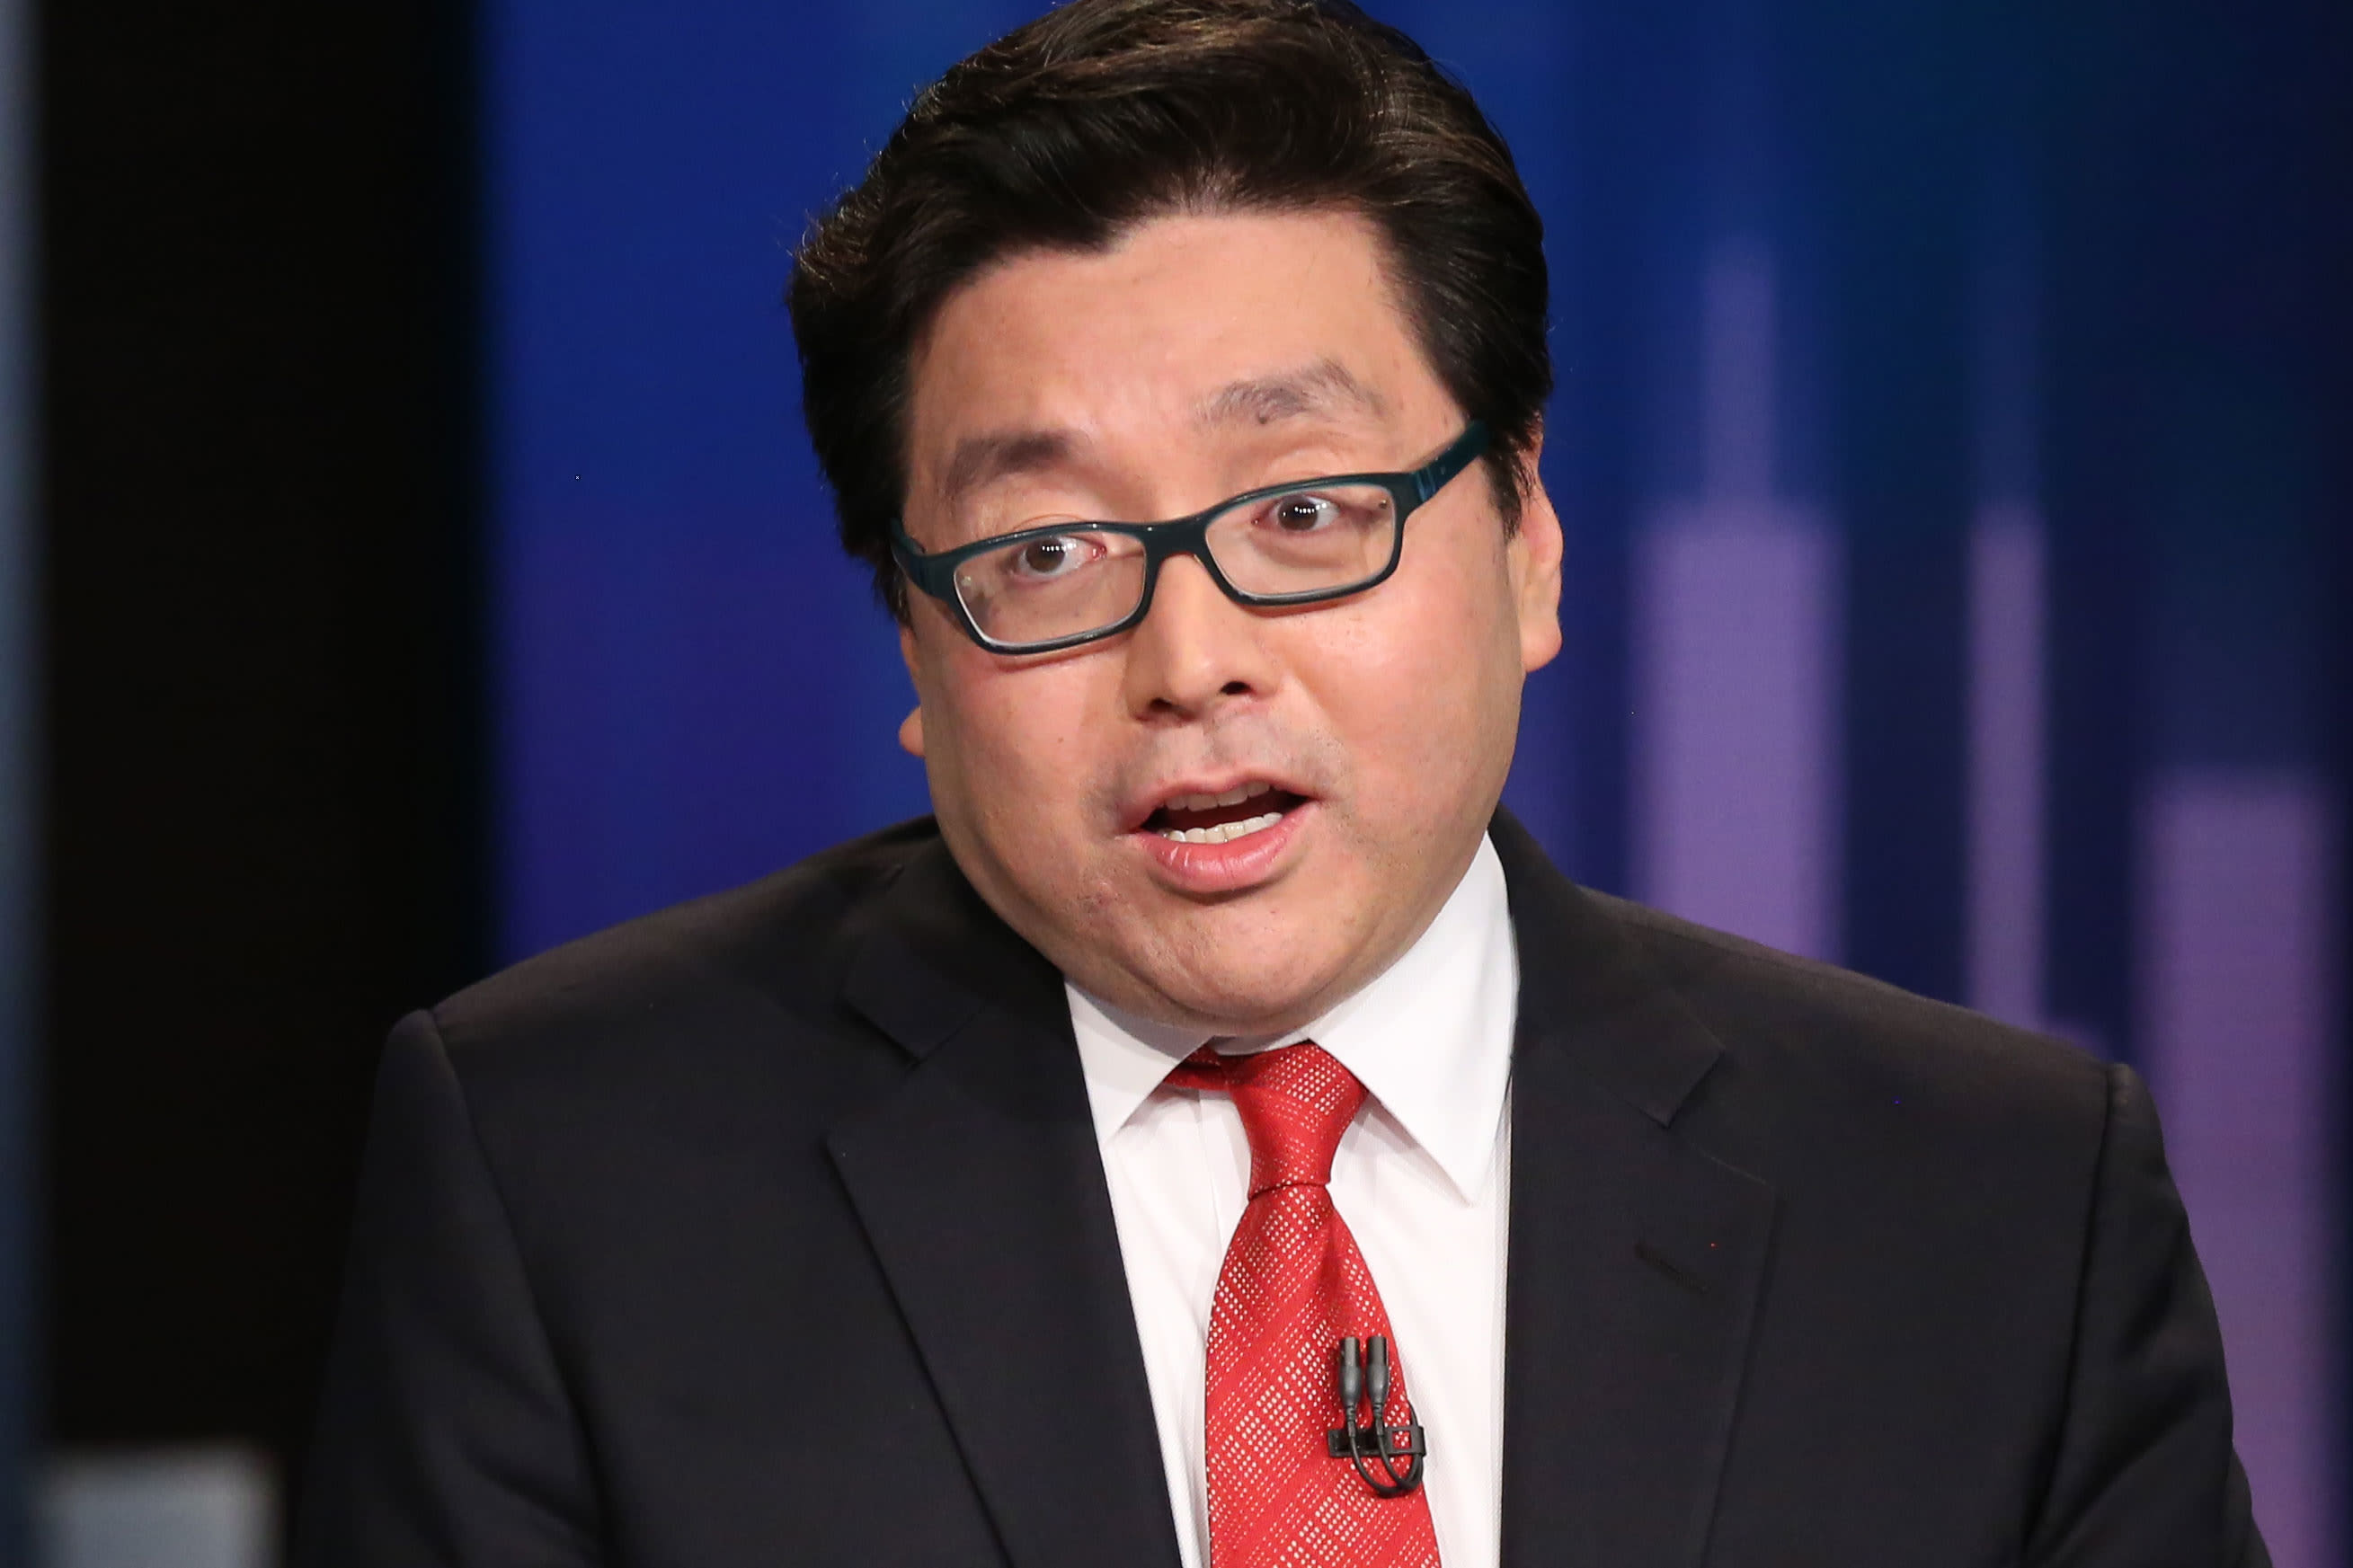 Fundstrat’s Tom Lee expects a “ripper rally” in April